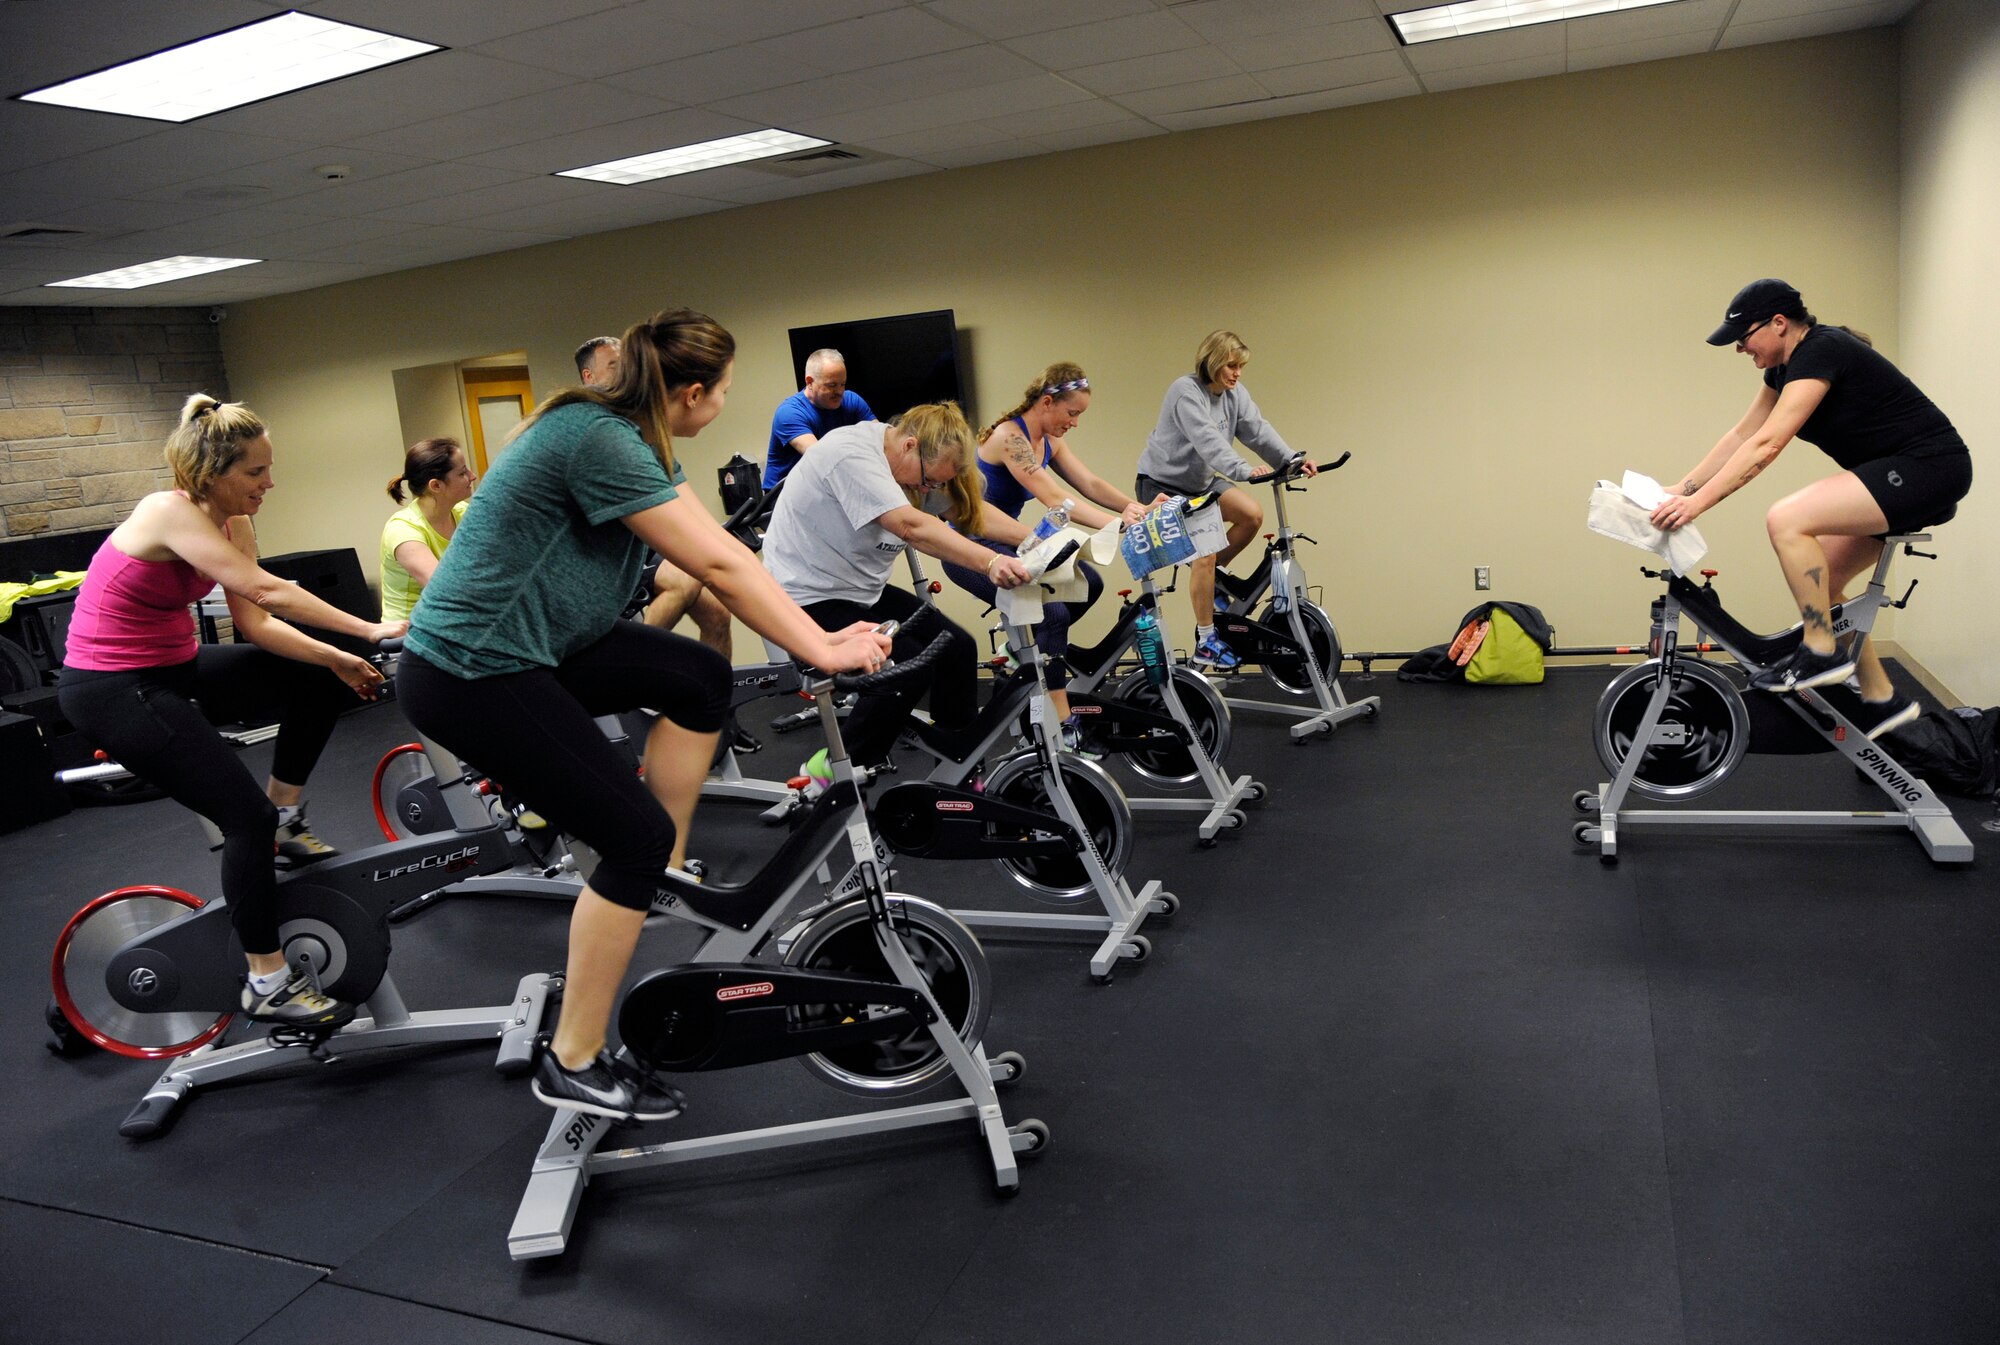 Oregon Air National Guard Senior Master Sgt. Bobbi Kennedy, a health service technician assigned to the 142nd Fighter Wing Medical Group, right, teaches a morning spin class at the base gym, Jan. 28, 2016, Portland Air National Guard Base, Ore. The 142nd Fighter Wing began 2016 with a new series of courses and activities under the Comprehensive Airmen Fitness program, designed to focus on Airmen and their families' physical, social, mental and spiritual wellness. (U.S. Air National Guard photo by Tech. Sgt. John Hughel, 142nd Fighter Wing Public Affairs/released)